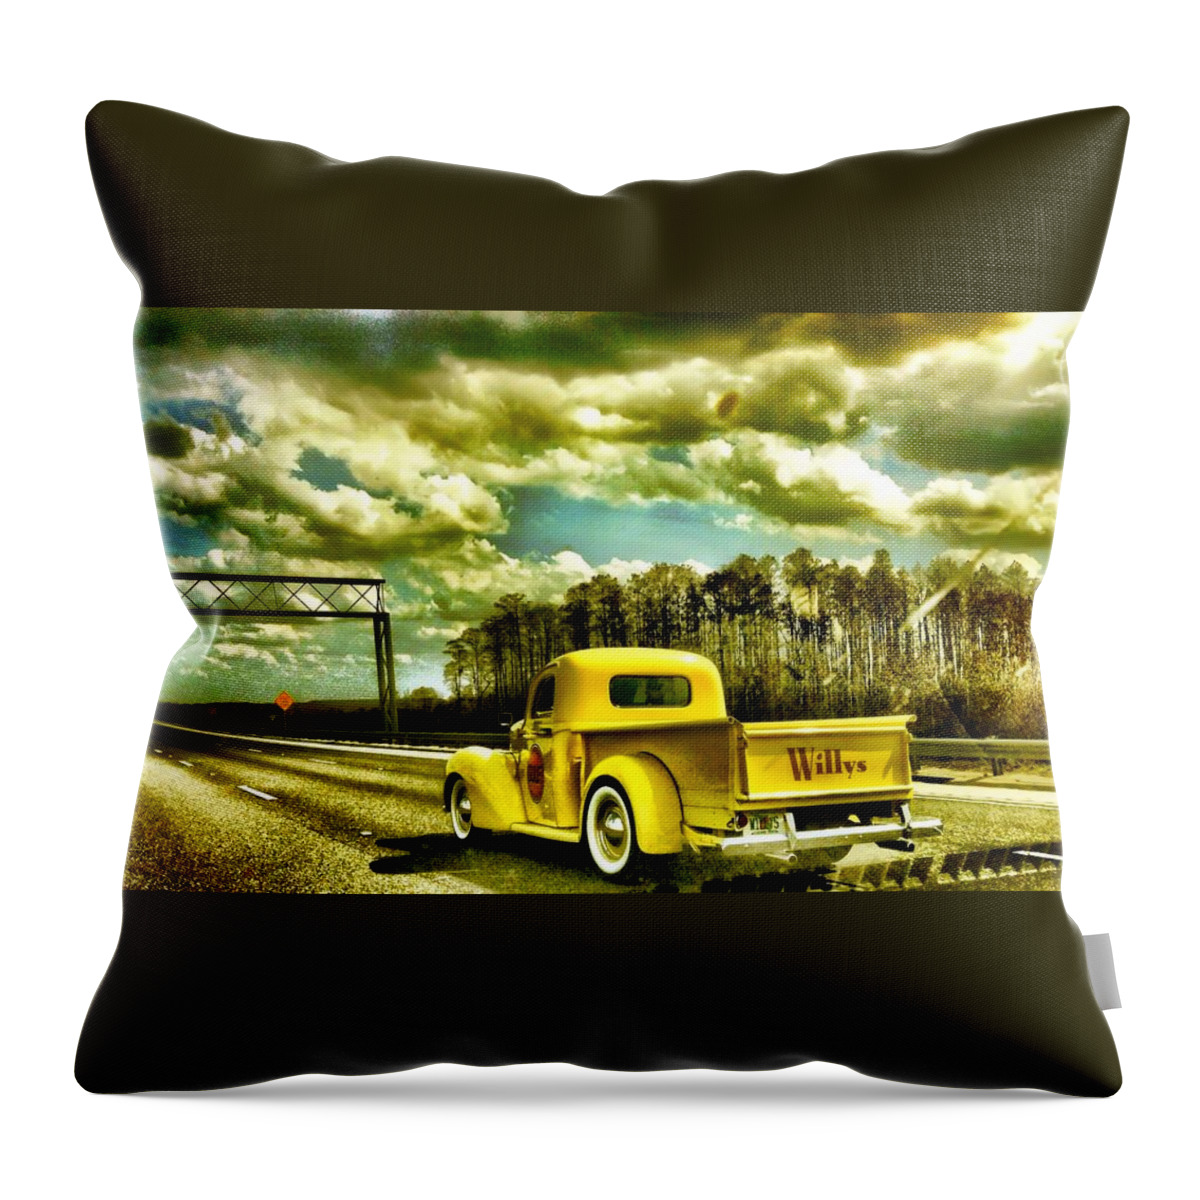 Landscape Throw Pillow featuring the photograph On The Road Again by Carlos Avila